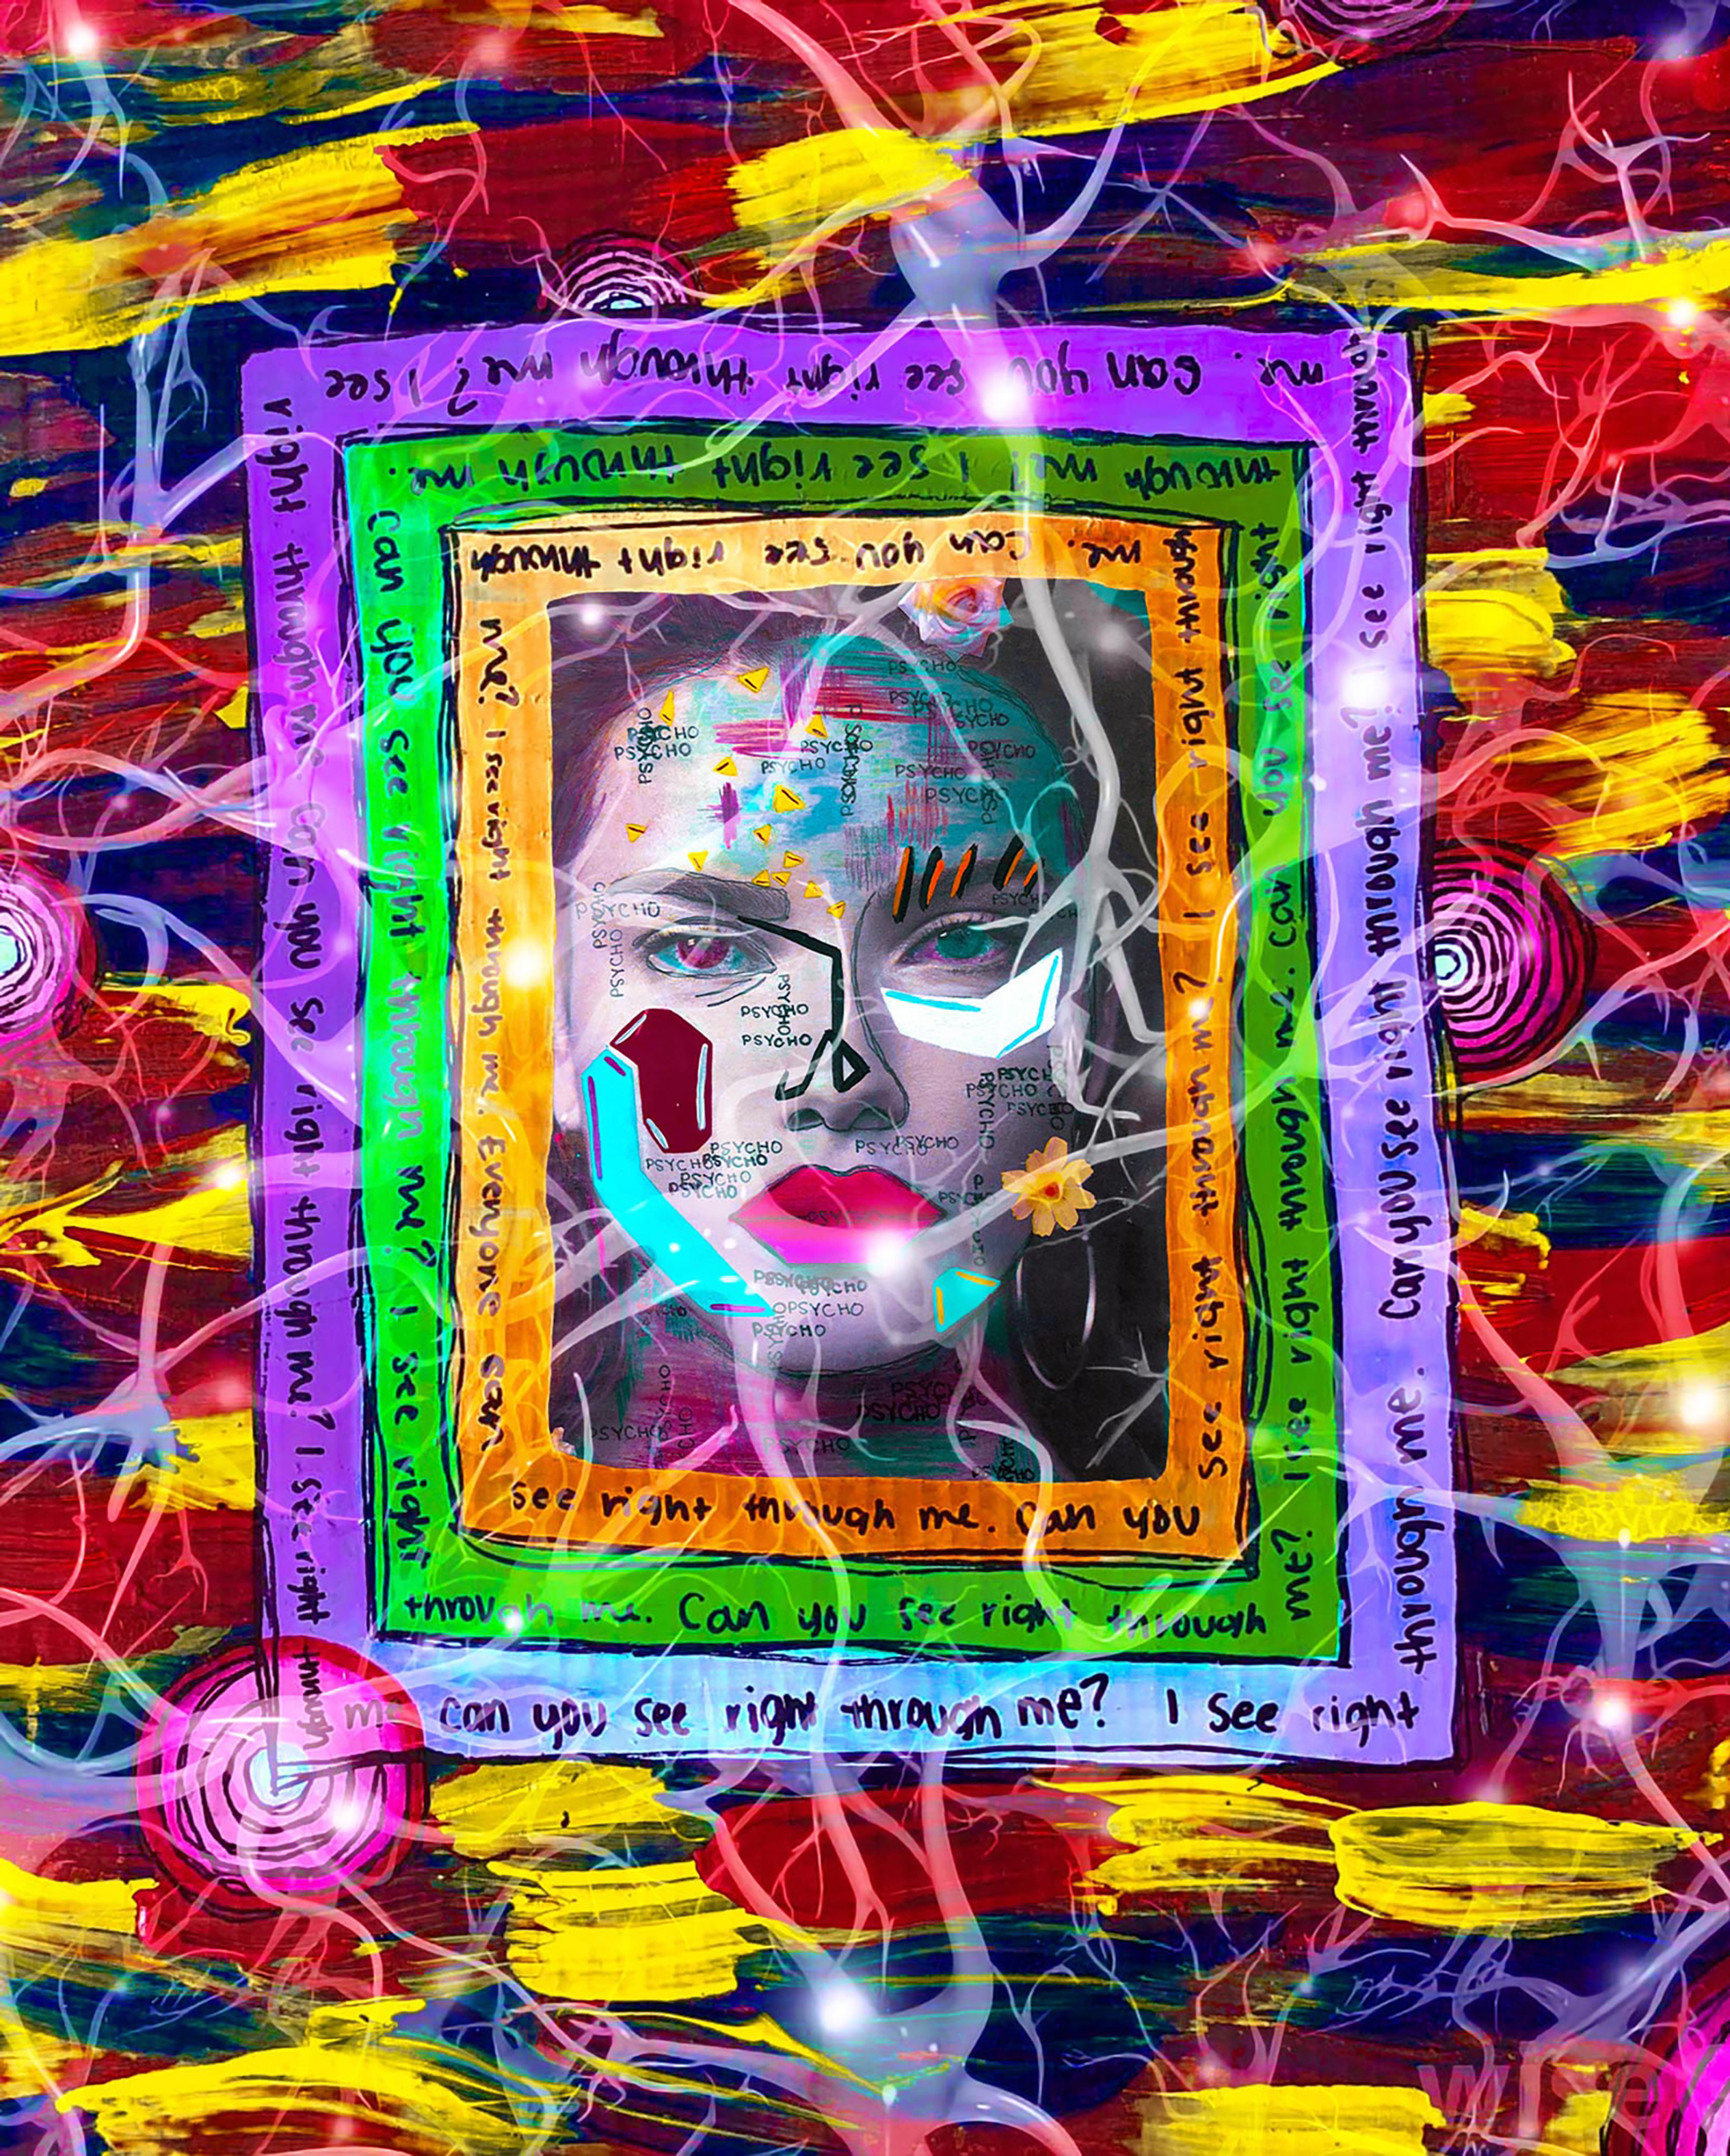 Image of a young woman's face at the center of a square, the imaged bordered by three square frames in yellow, green, and purple, with a swirl of colors filling out the square